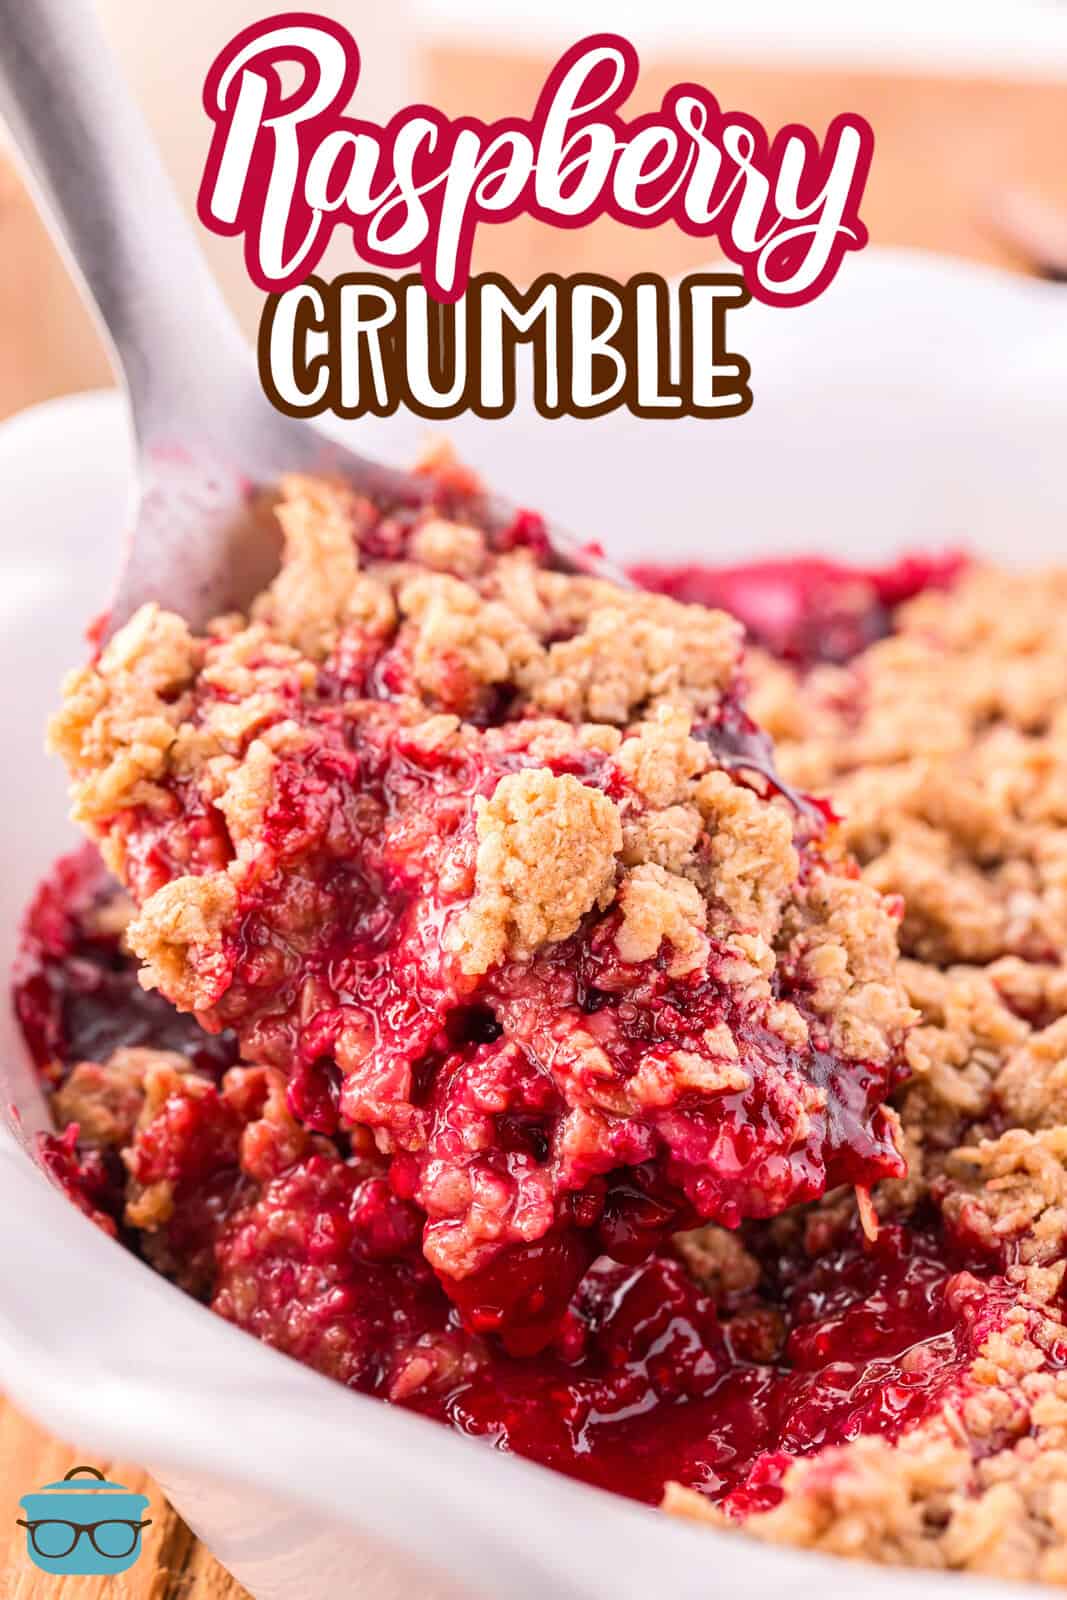 A serving utensil getting a scoop of Raspberry Crumble from a white dish.